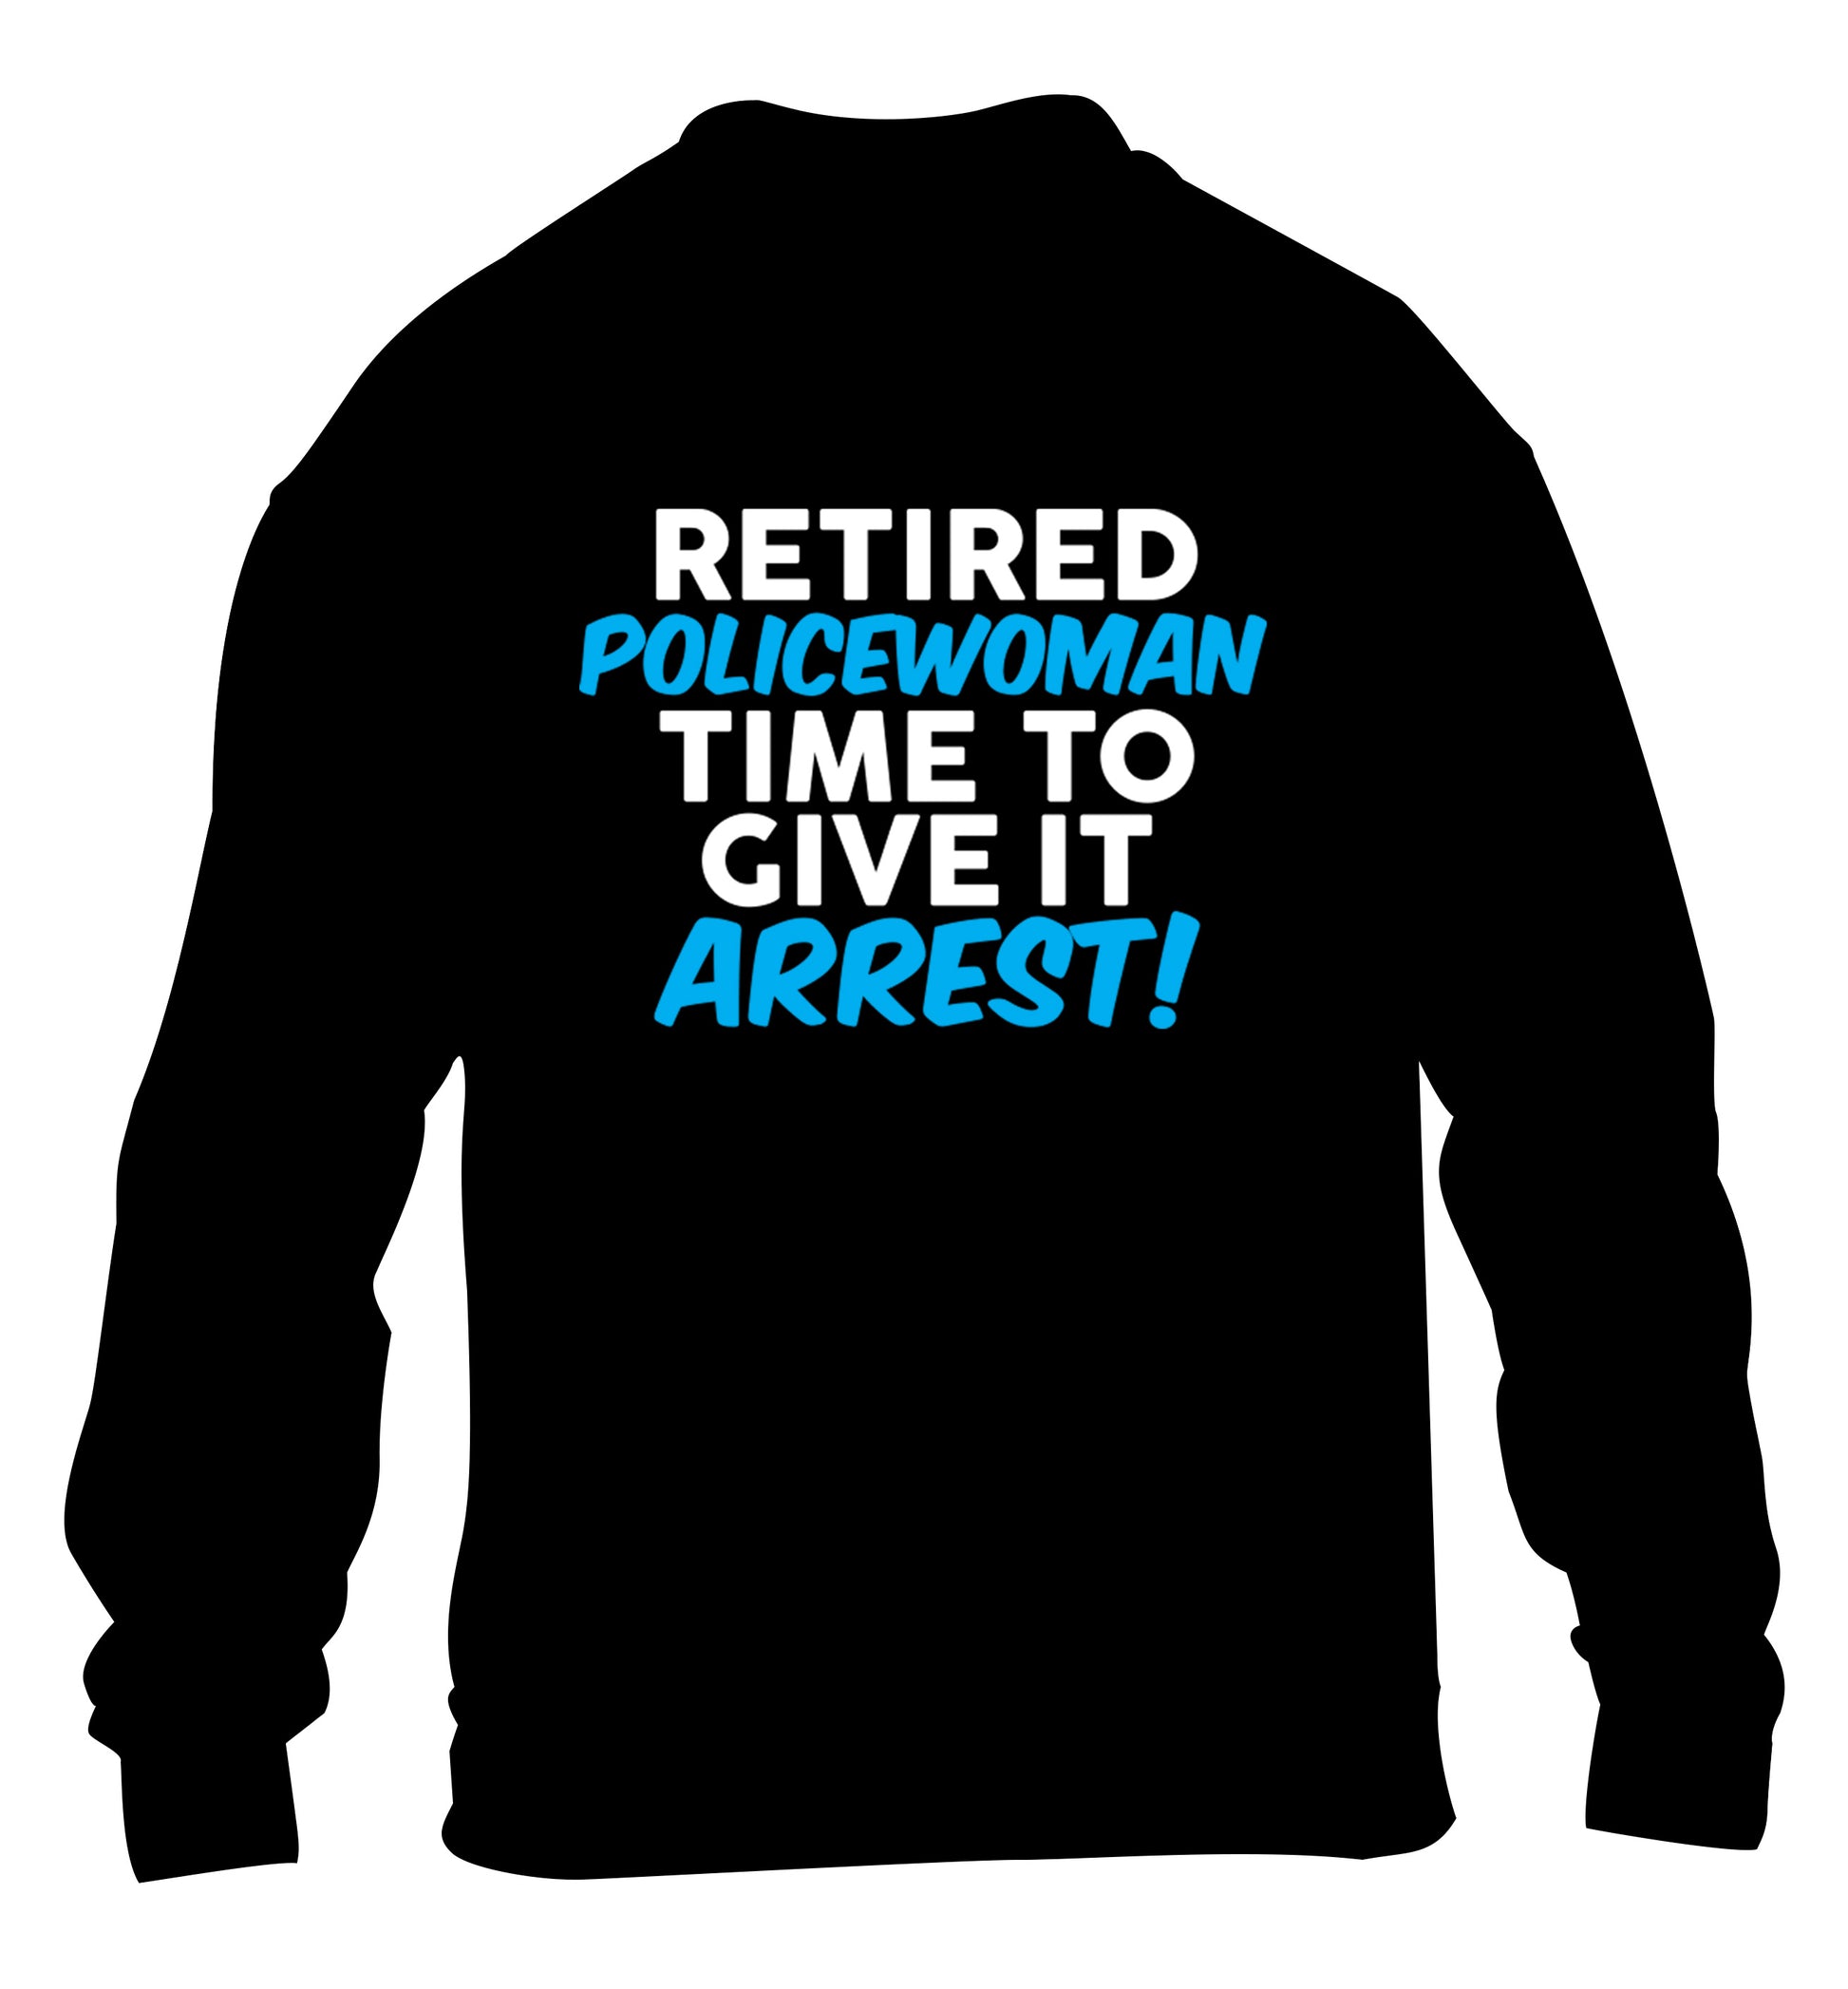 Retired policewoman time to give it arrest children's black sweater 12-13 Years